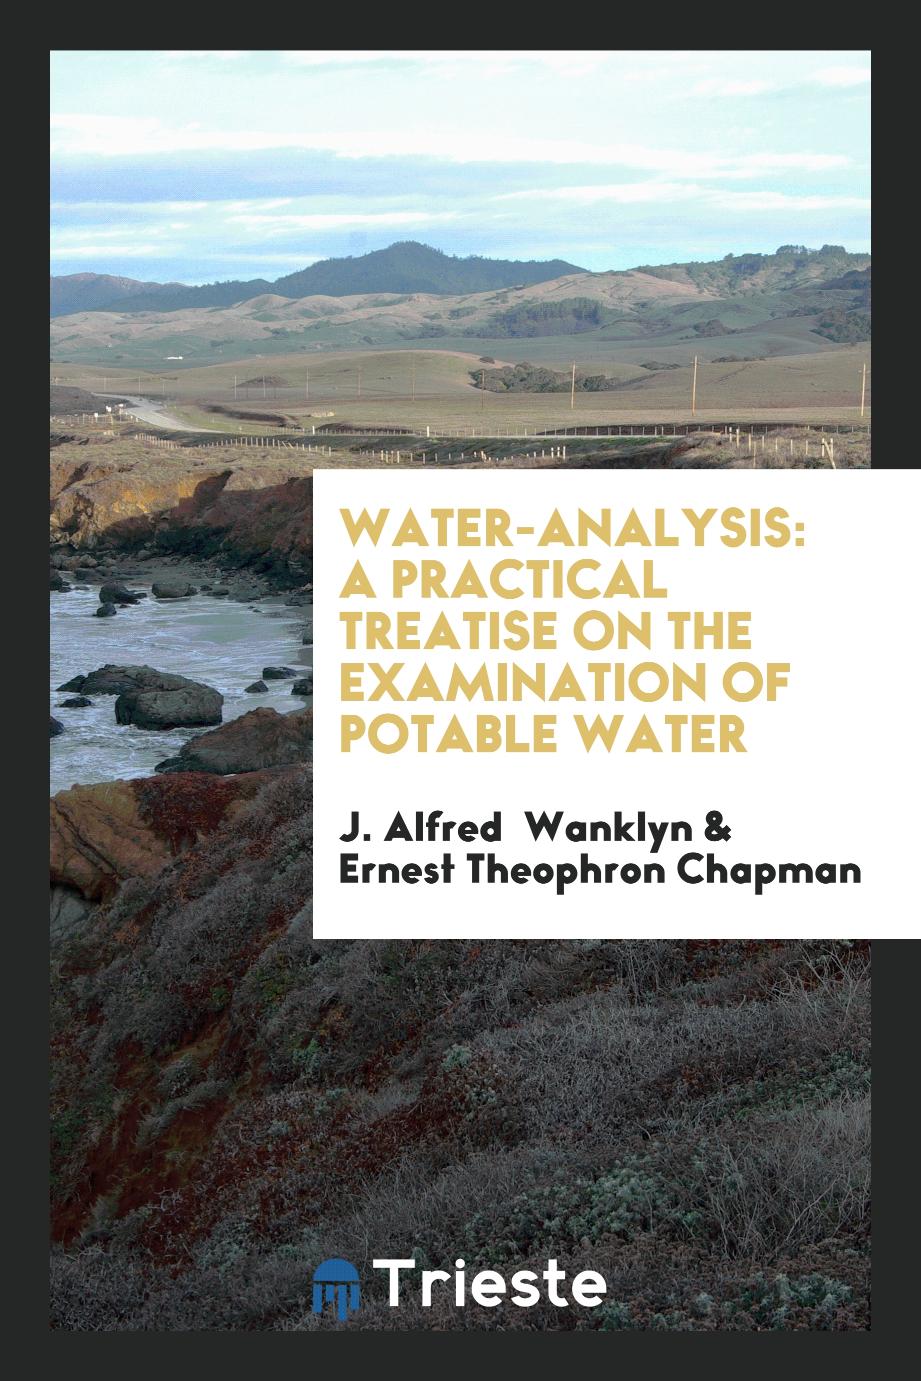 Water-Analysis: A Practical Treatise on the Examination of Potable Water